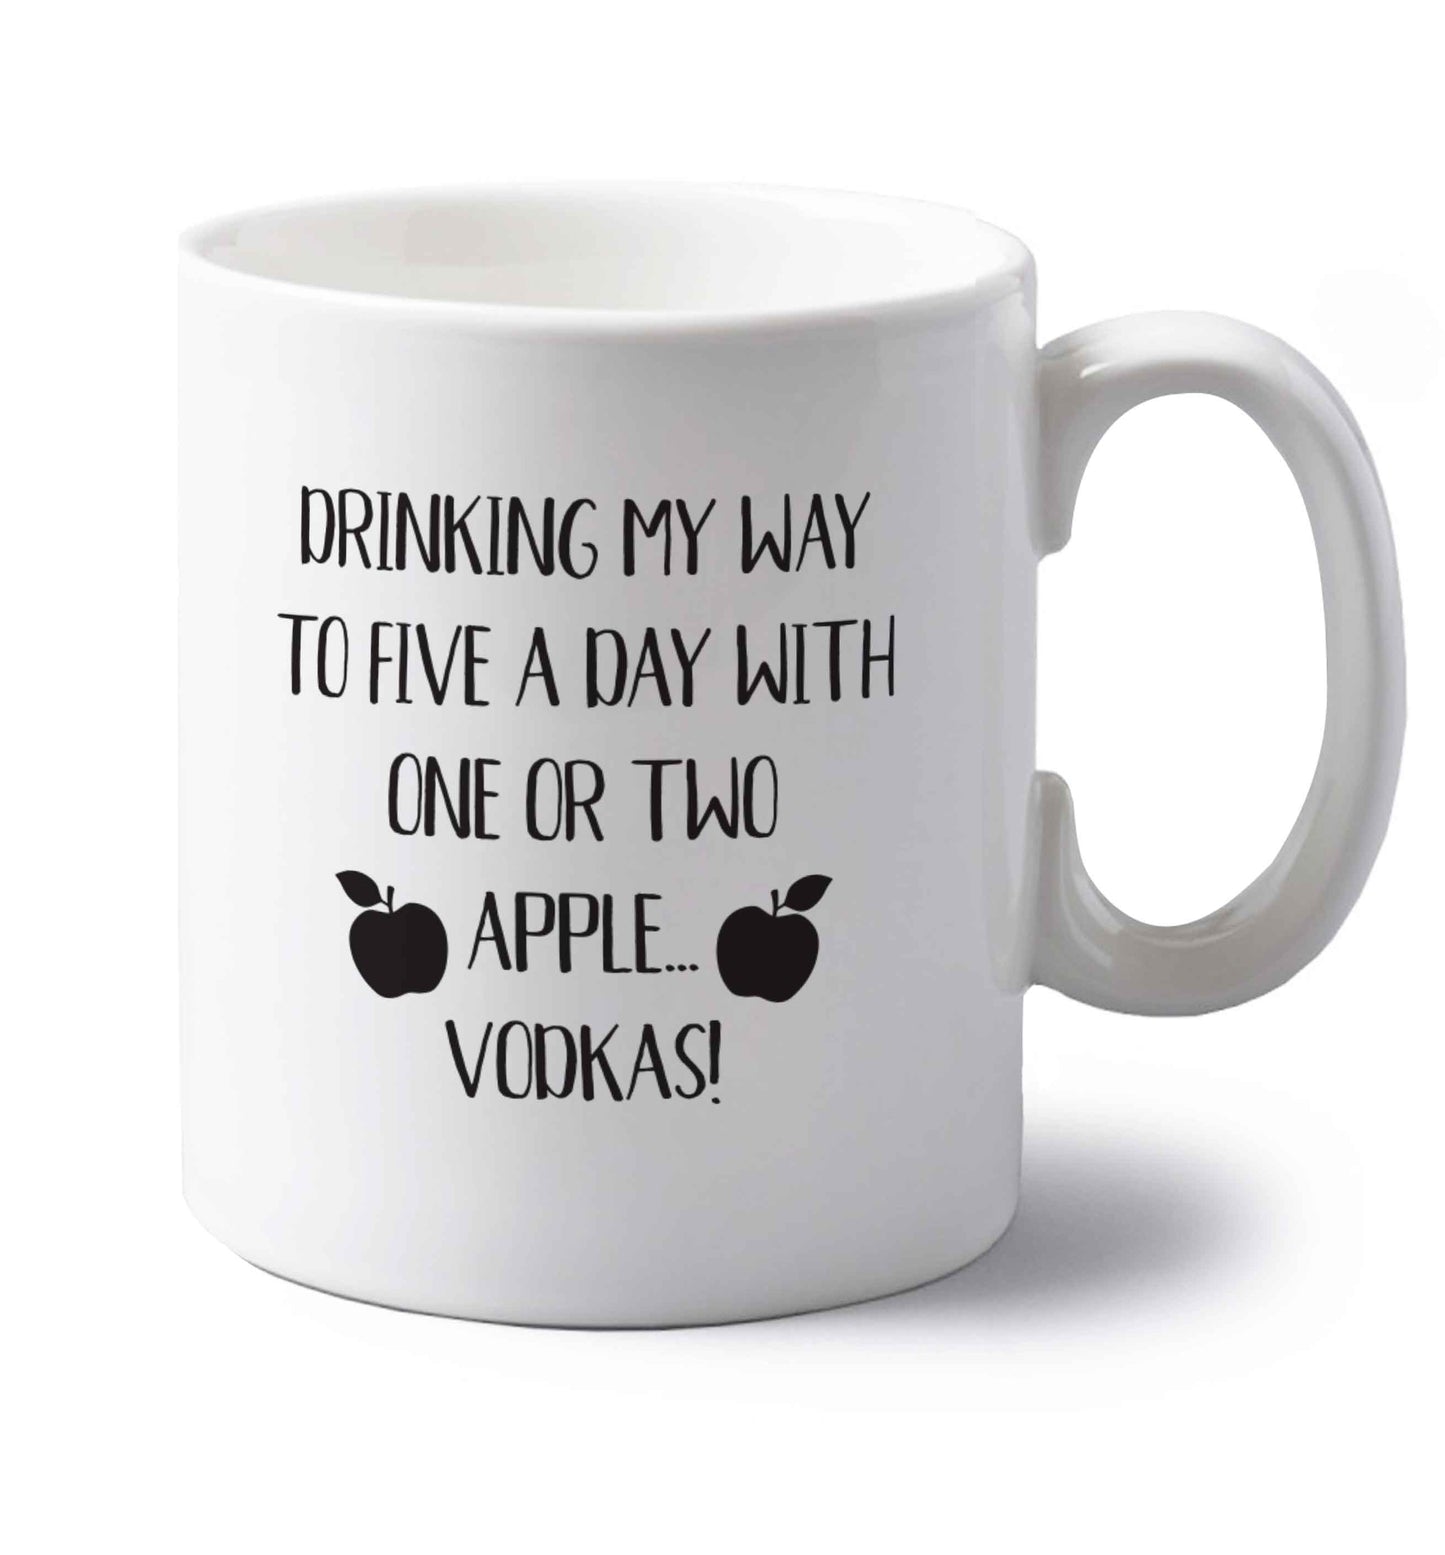 Drinking my way to five a day with one or two apple vodkas left handed white ceramic mug 